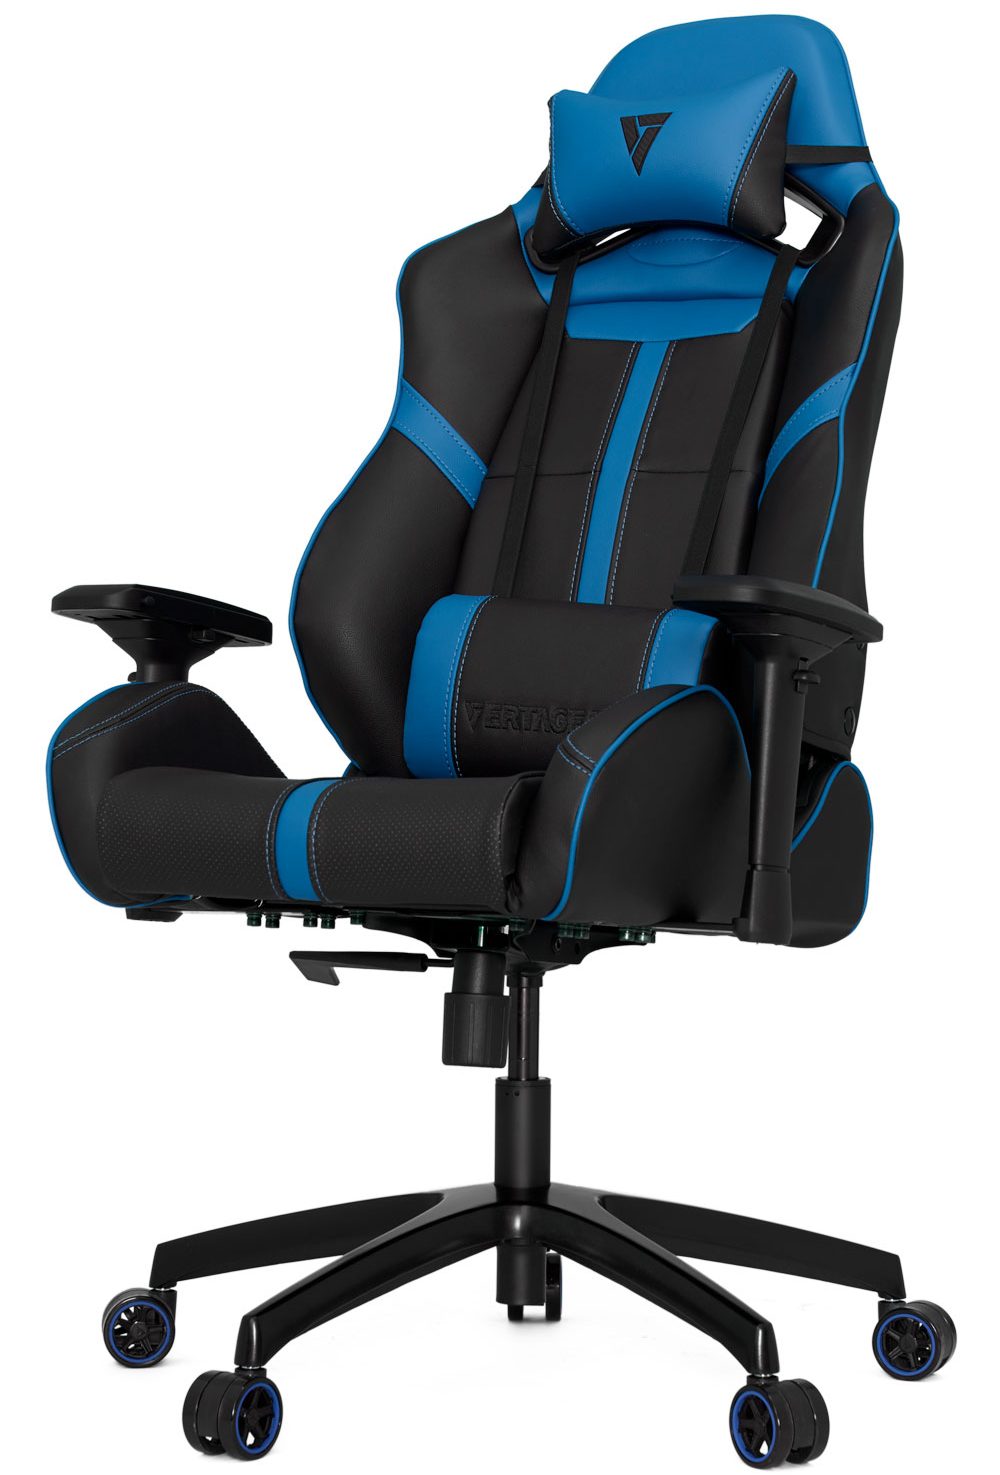 IKEA customizes gaming chairs using 3D printing